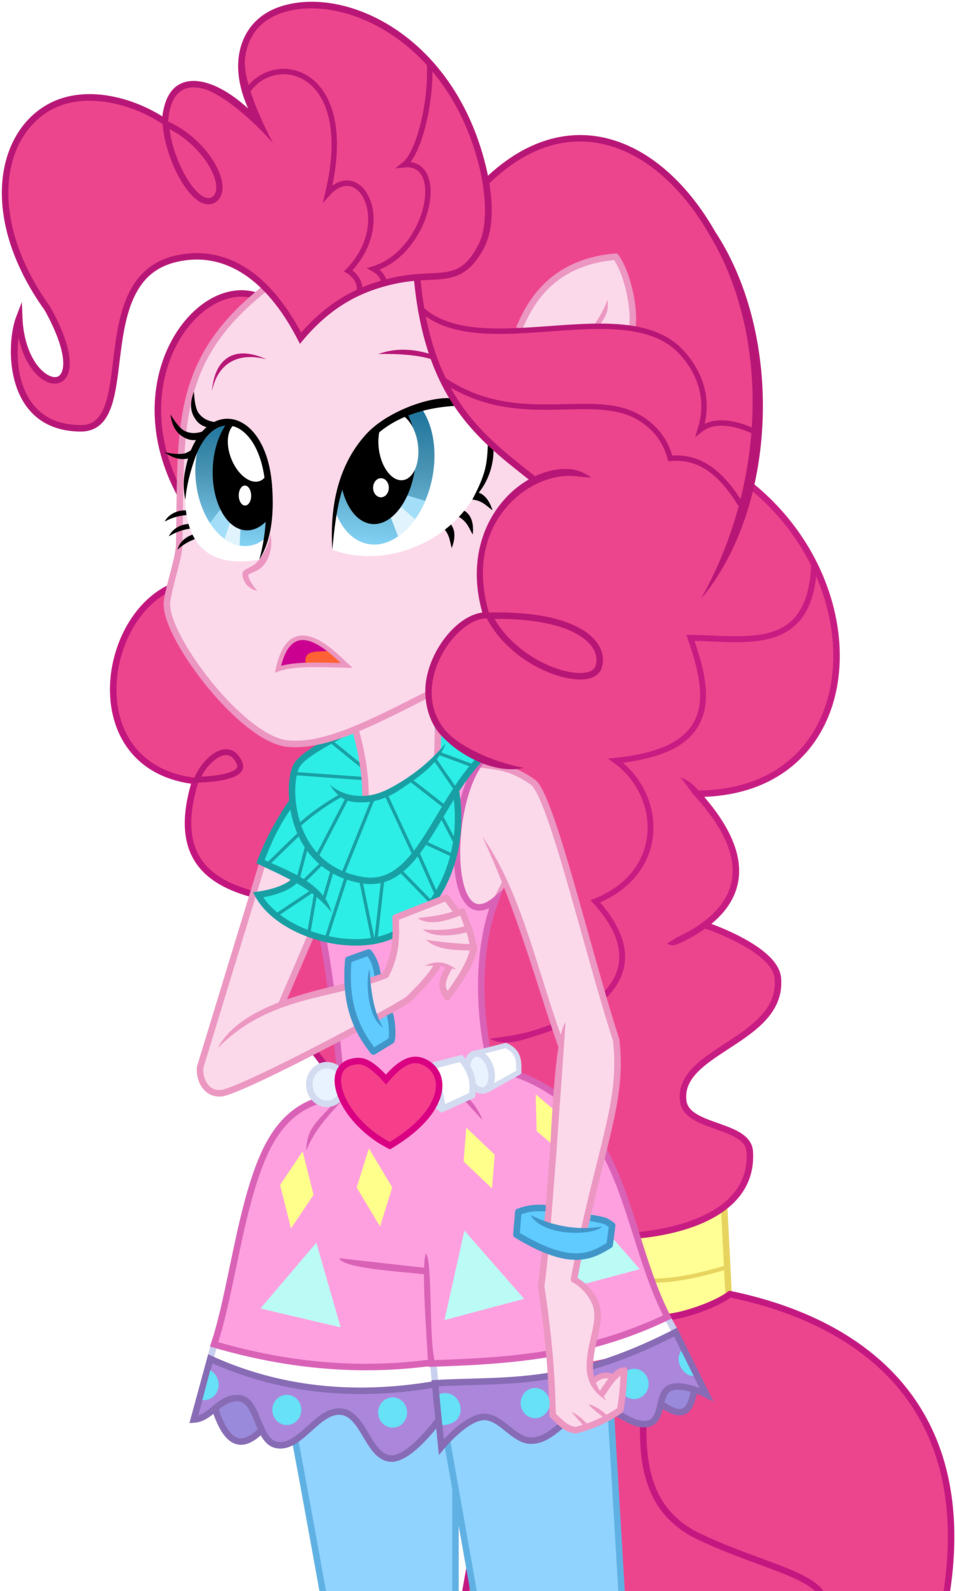 Pinkie Worried By Limedazzle Pinkie Worried By Limedazzle - Pinkie Pie Legend Of Everfree (1024x1605)